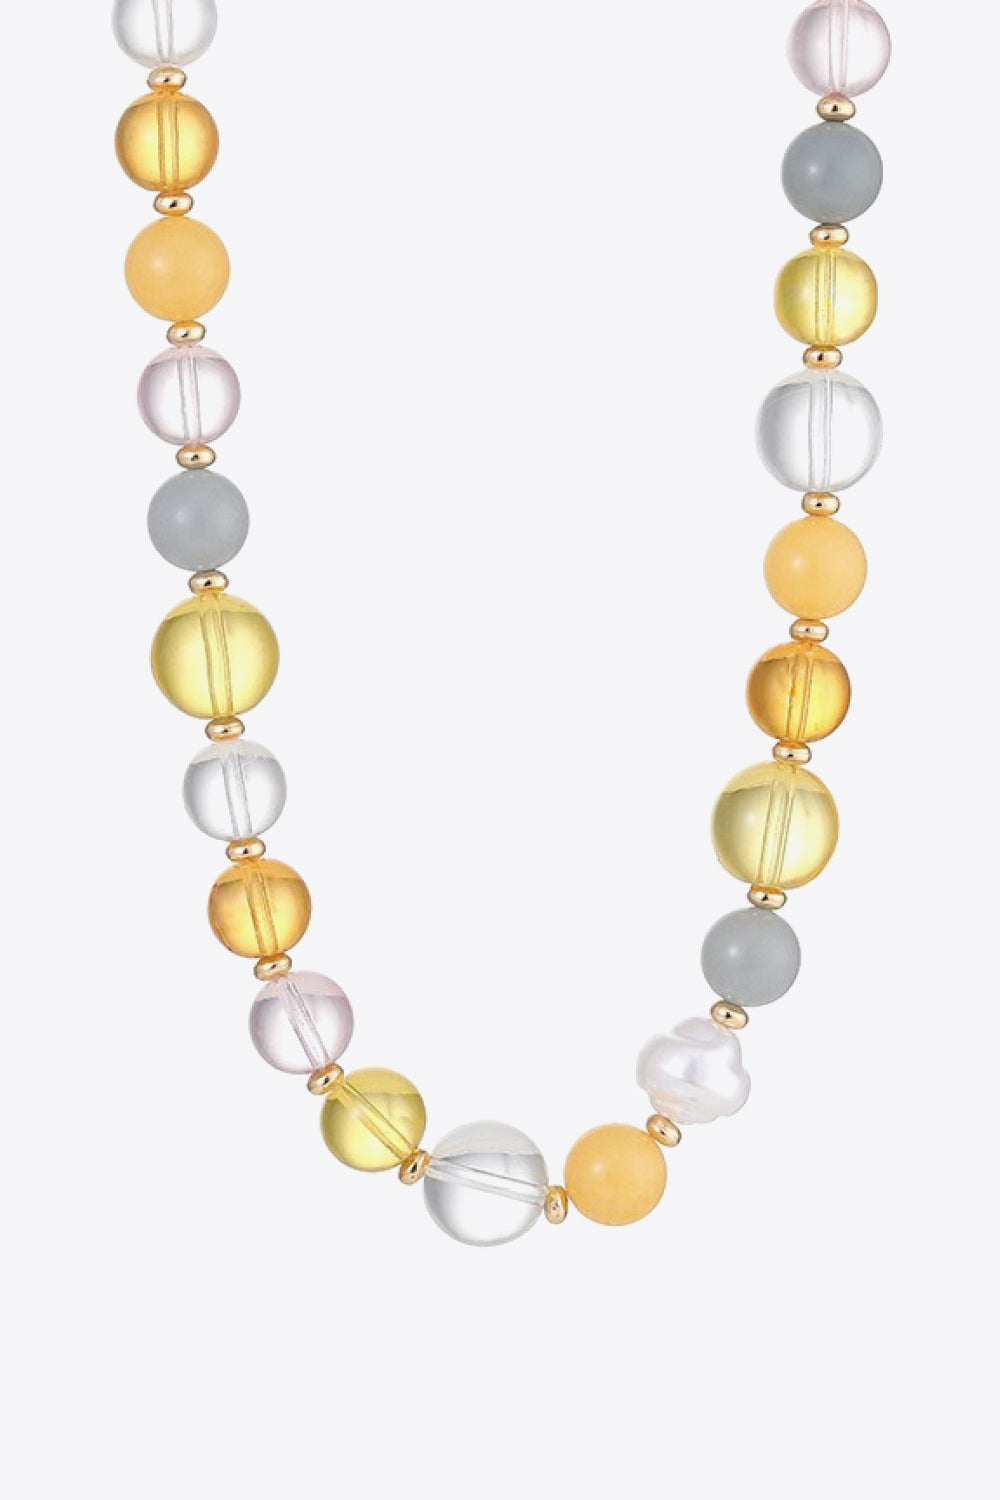 Multicolored Bead Necklace - Necklaces - FITGGINS